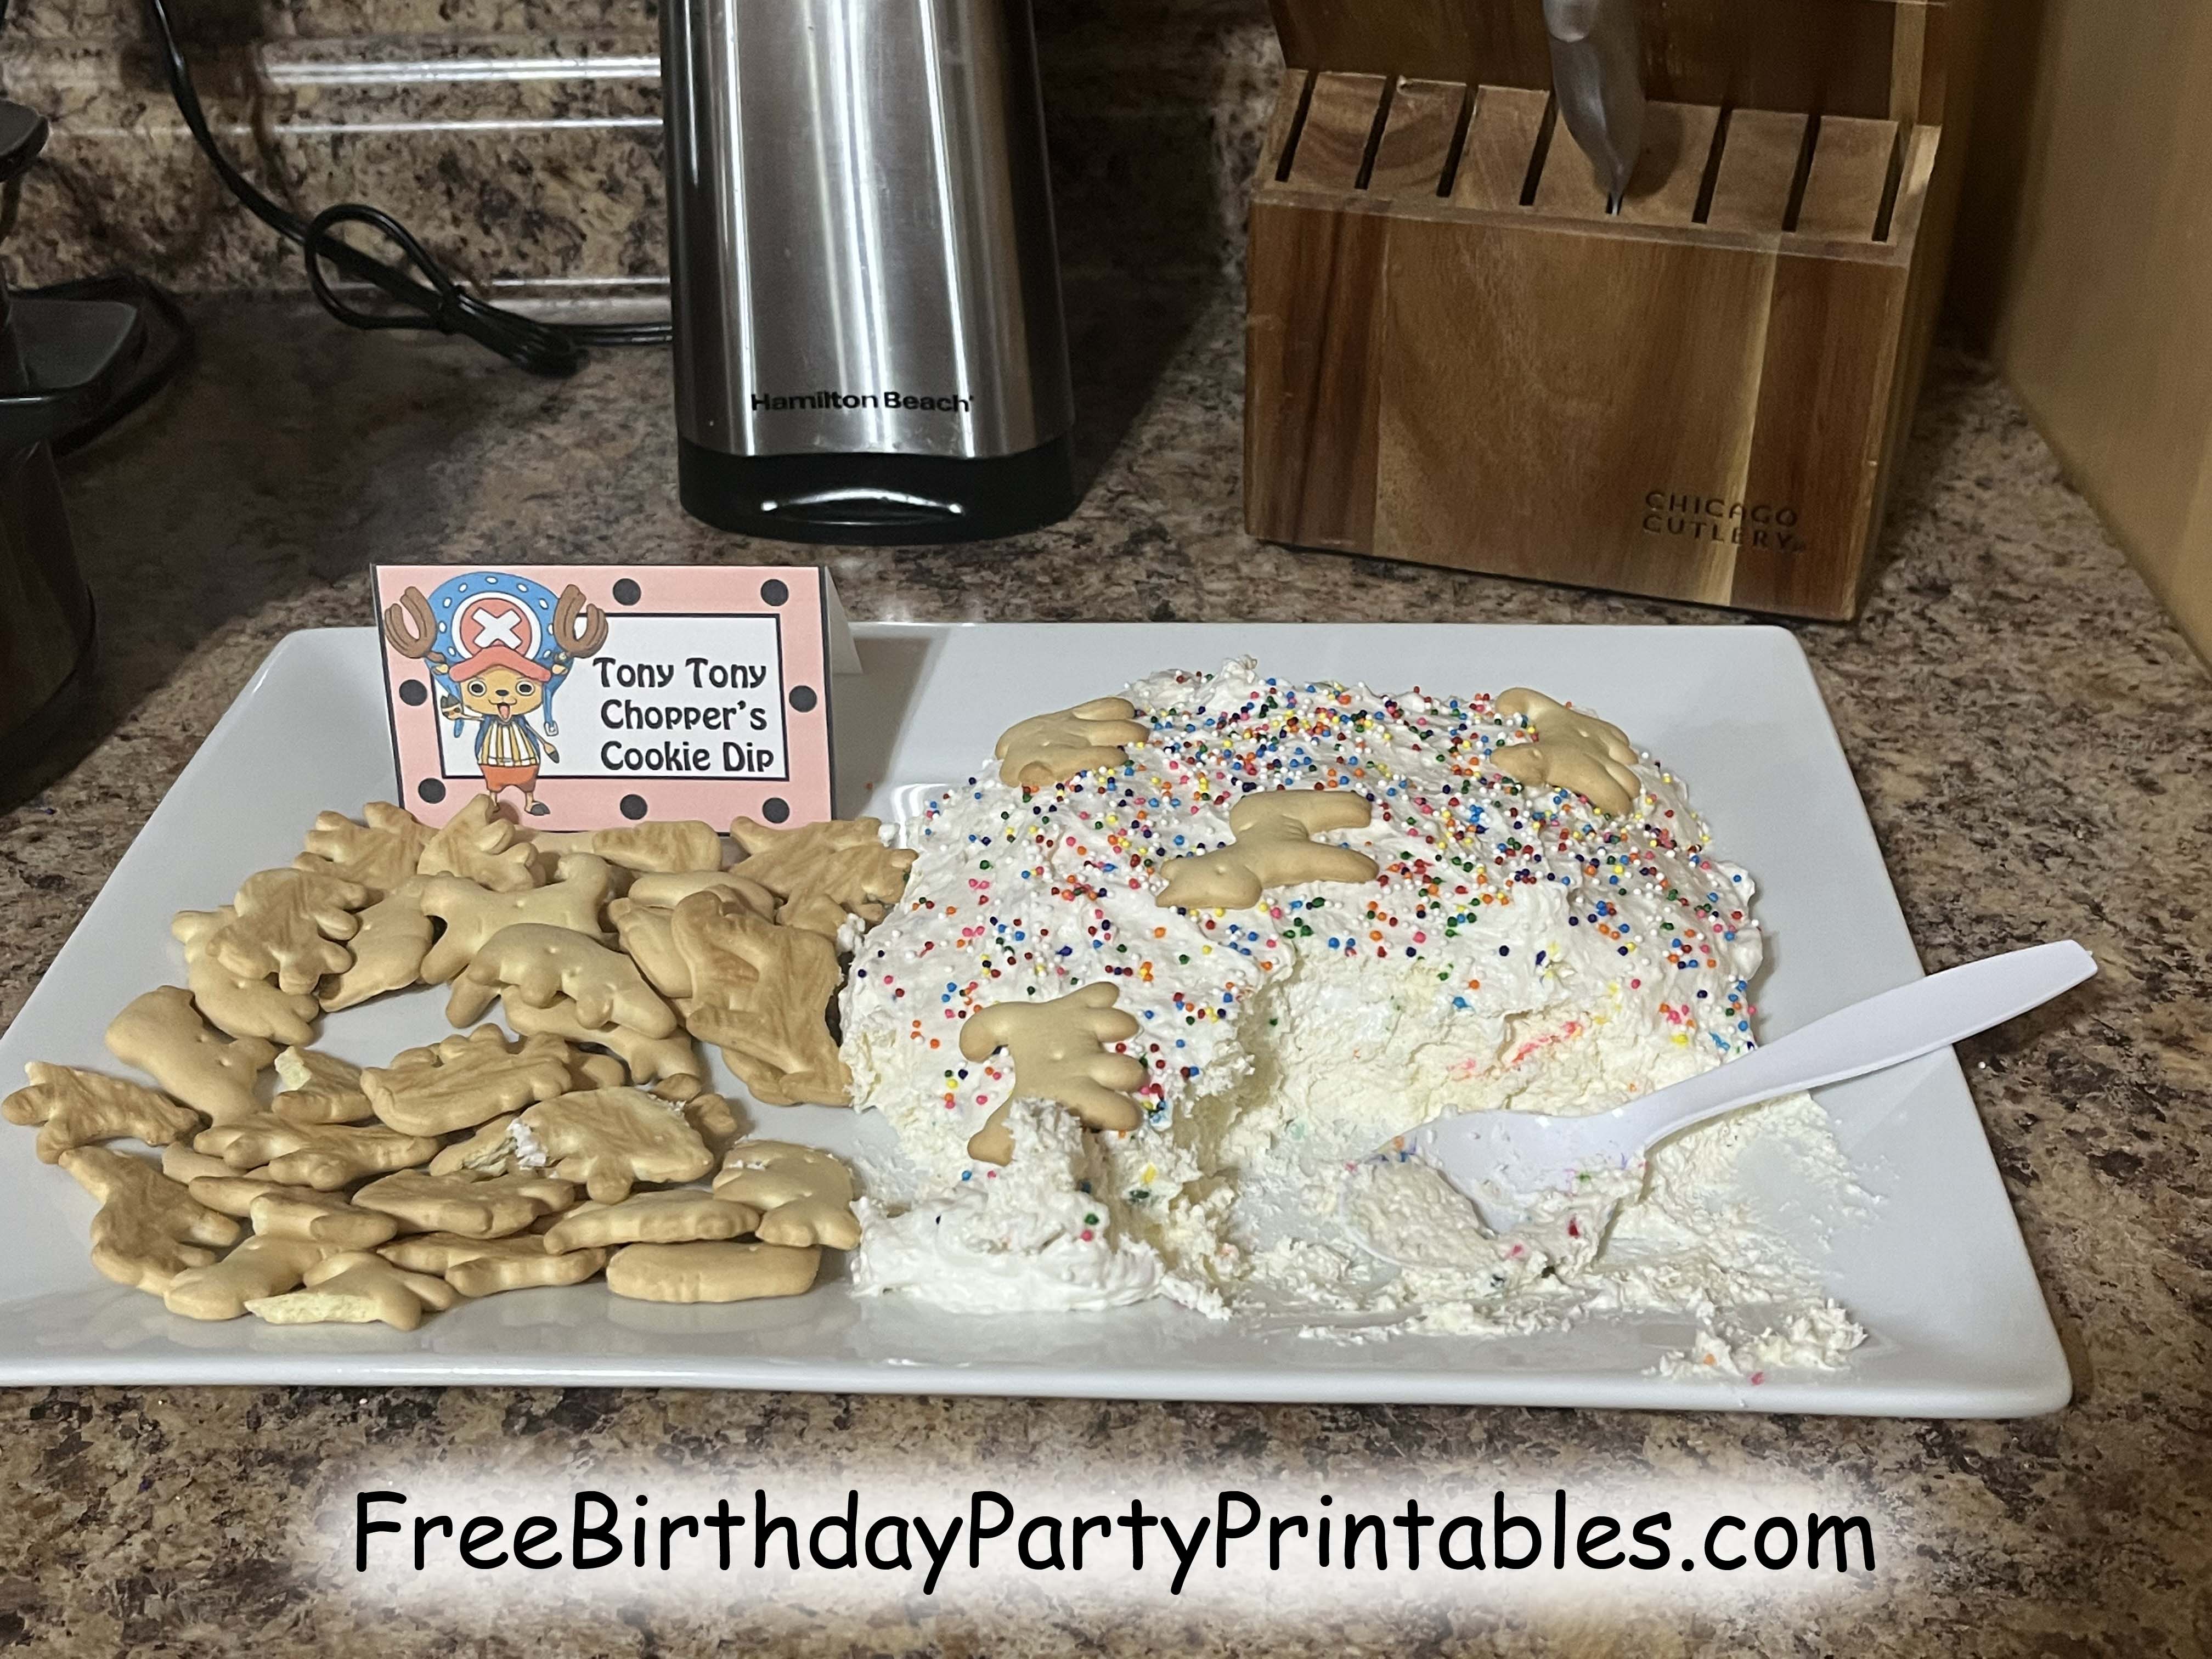 One Piece Birthday Party Printables Free Food Cards Tony Tony Chopper's Cookie Dip